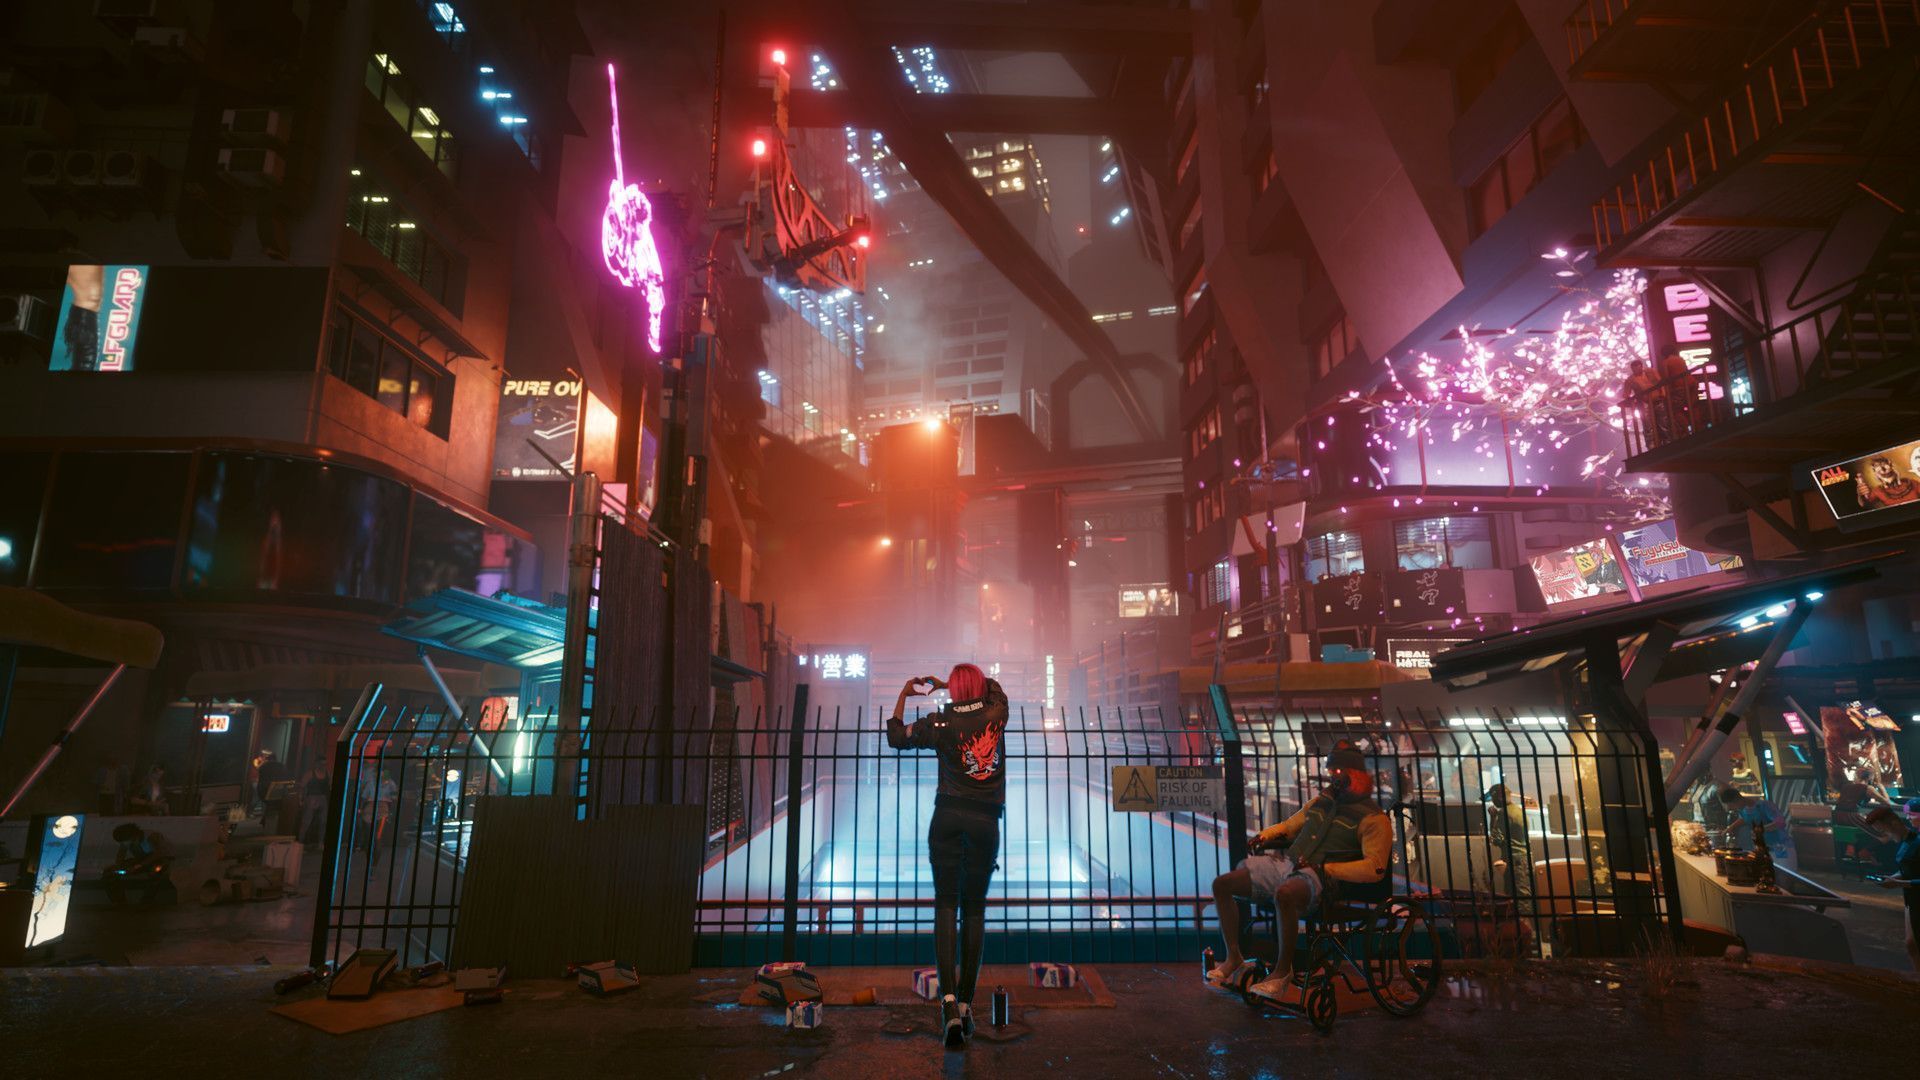 Cyberpunk 2077: Where Aesthetic Excellence Meets Narrative Mediocrity